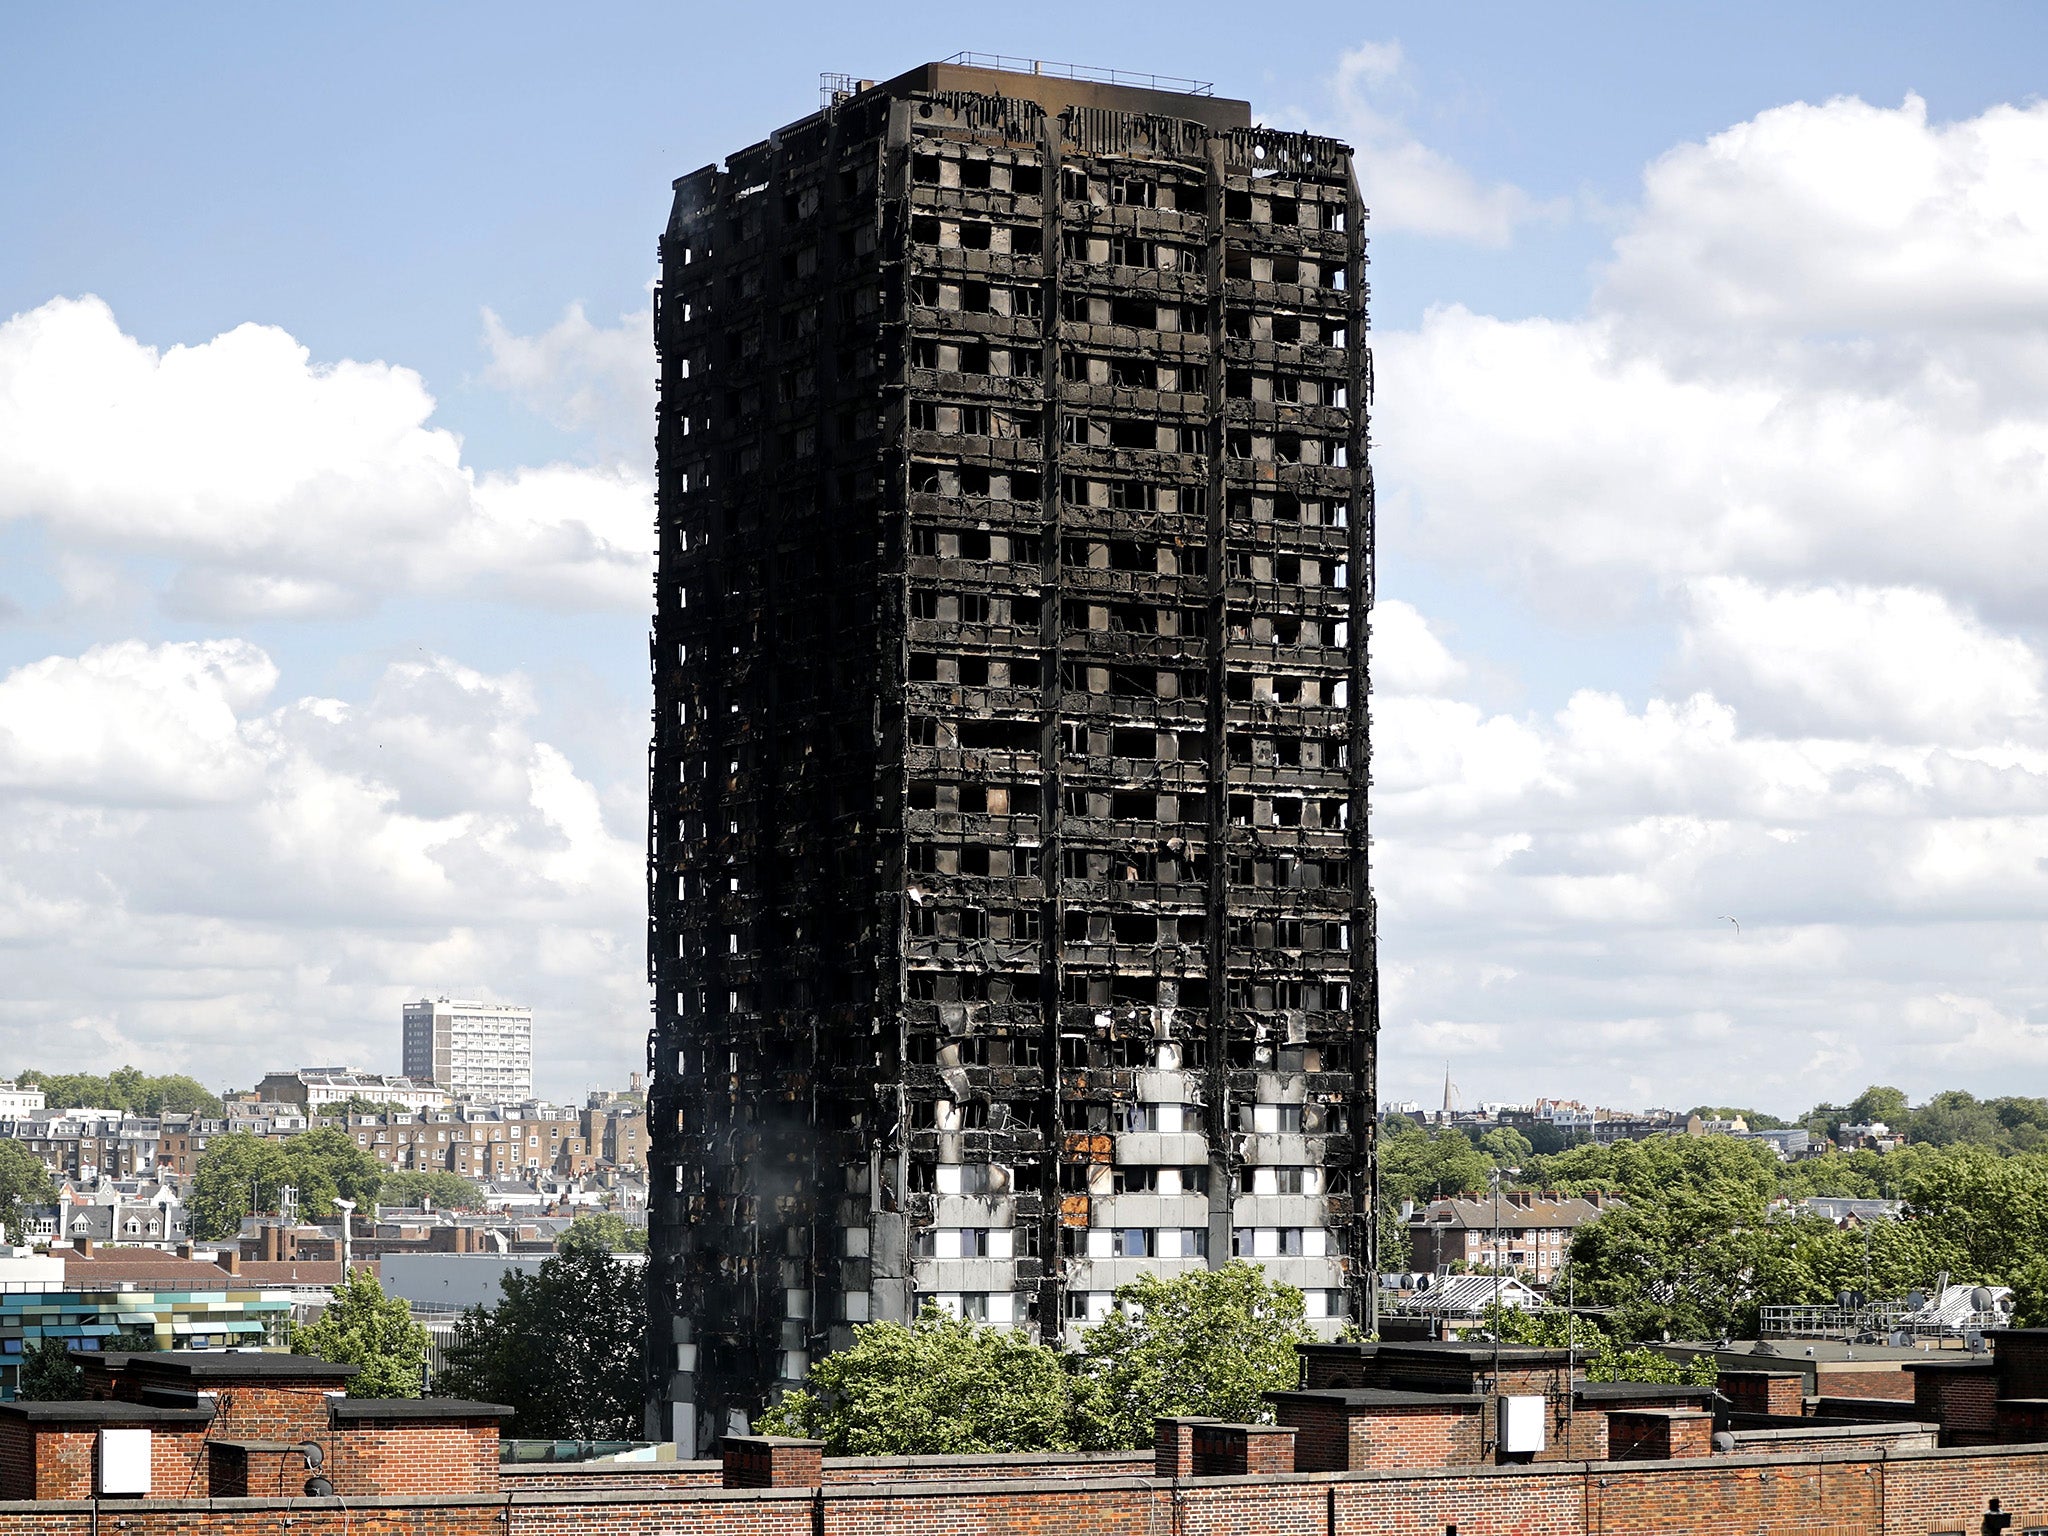 Flammable cladding was blamed for rapid spread of tower block fire